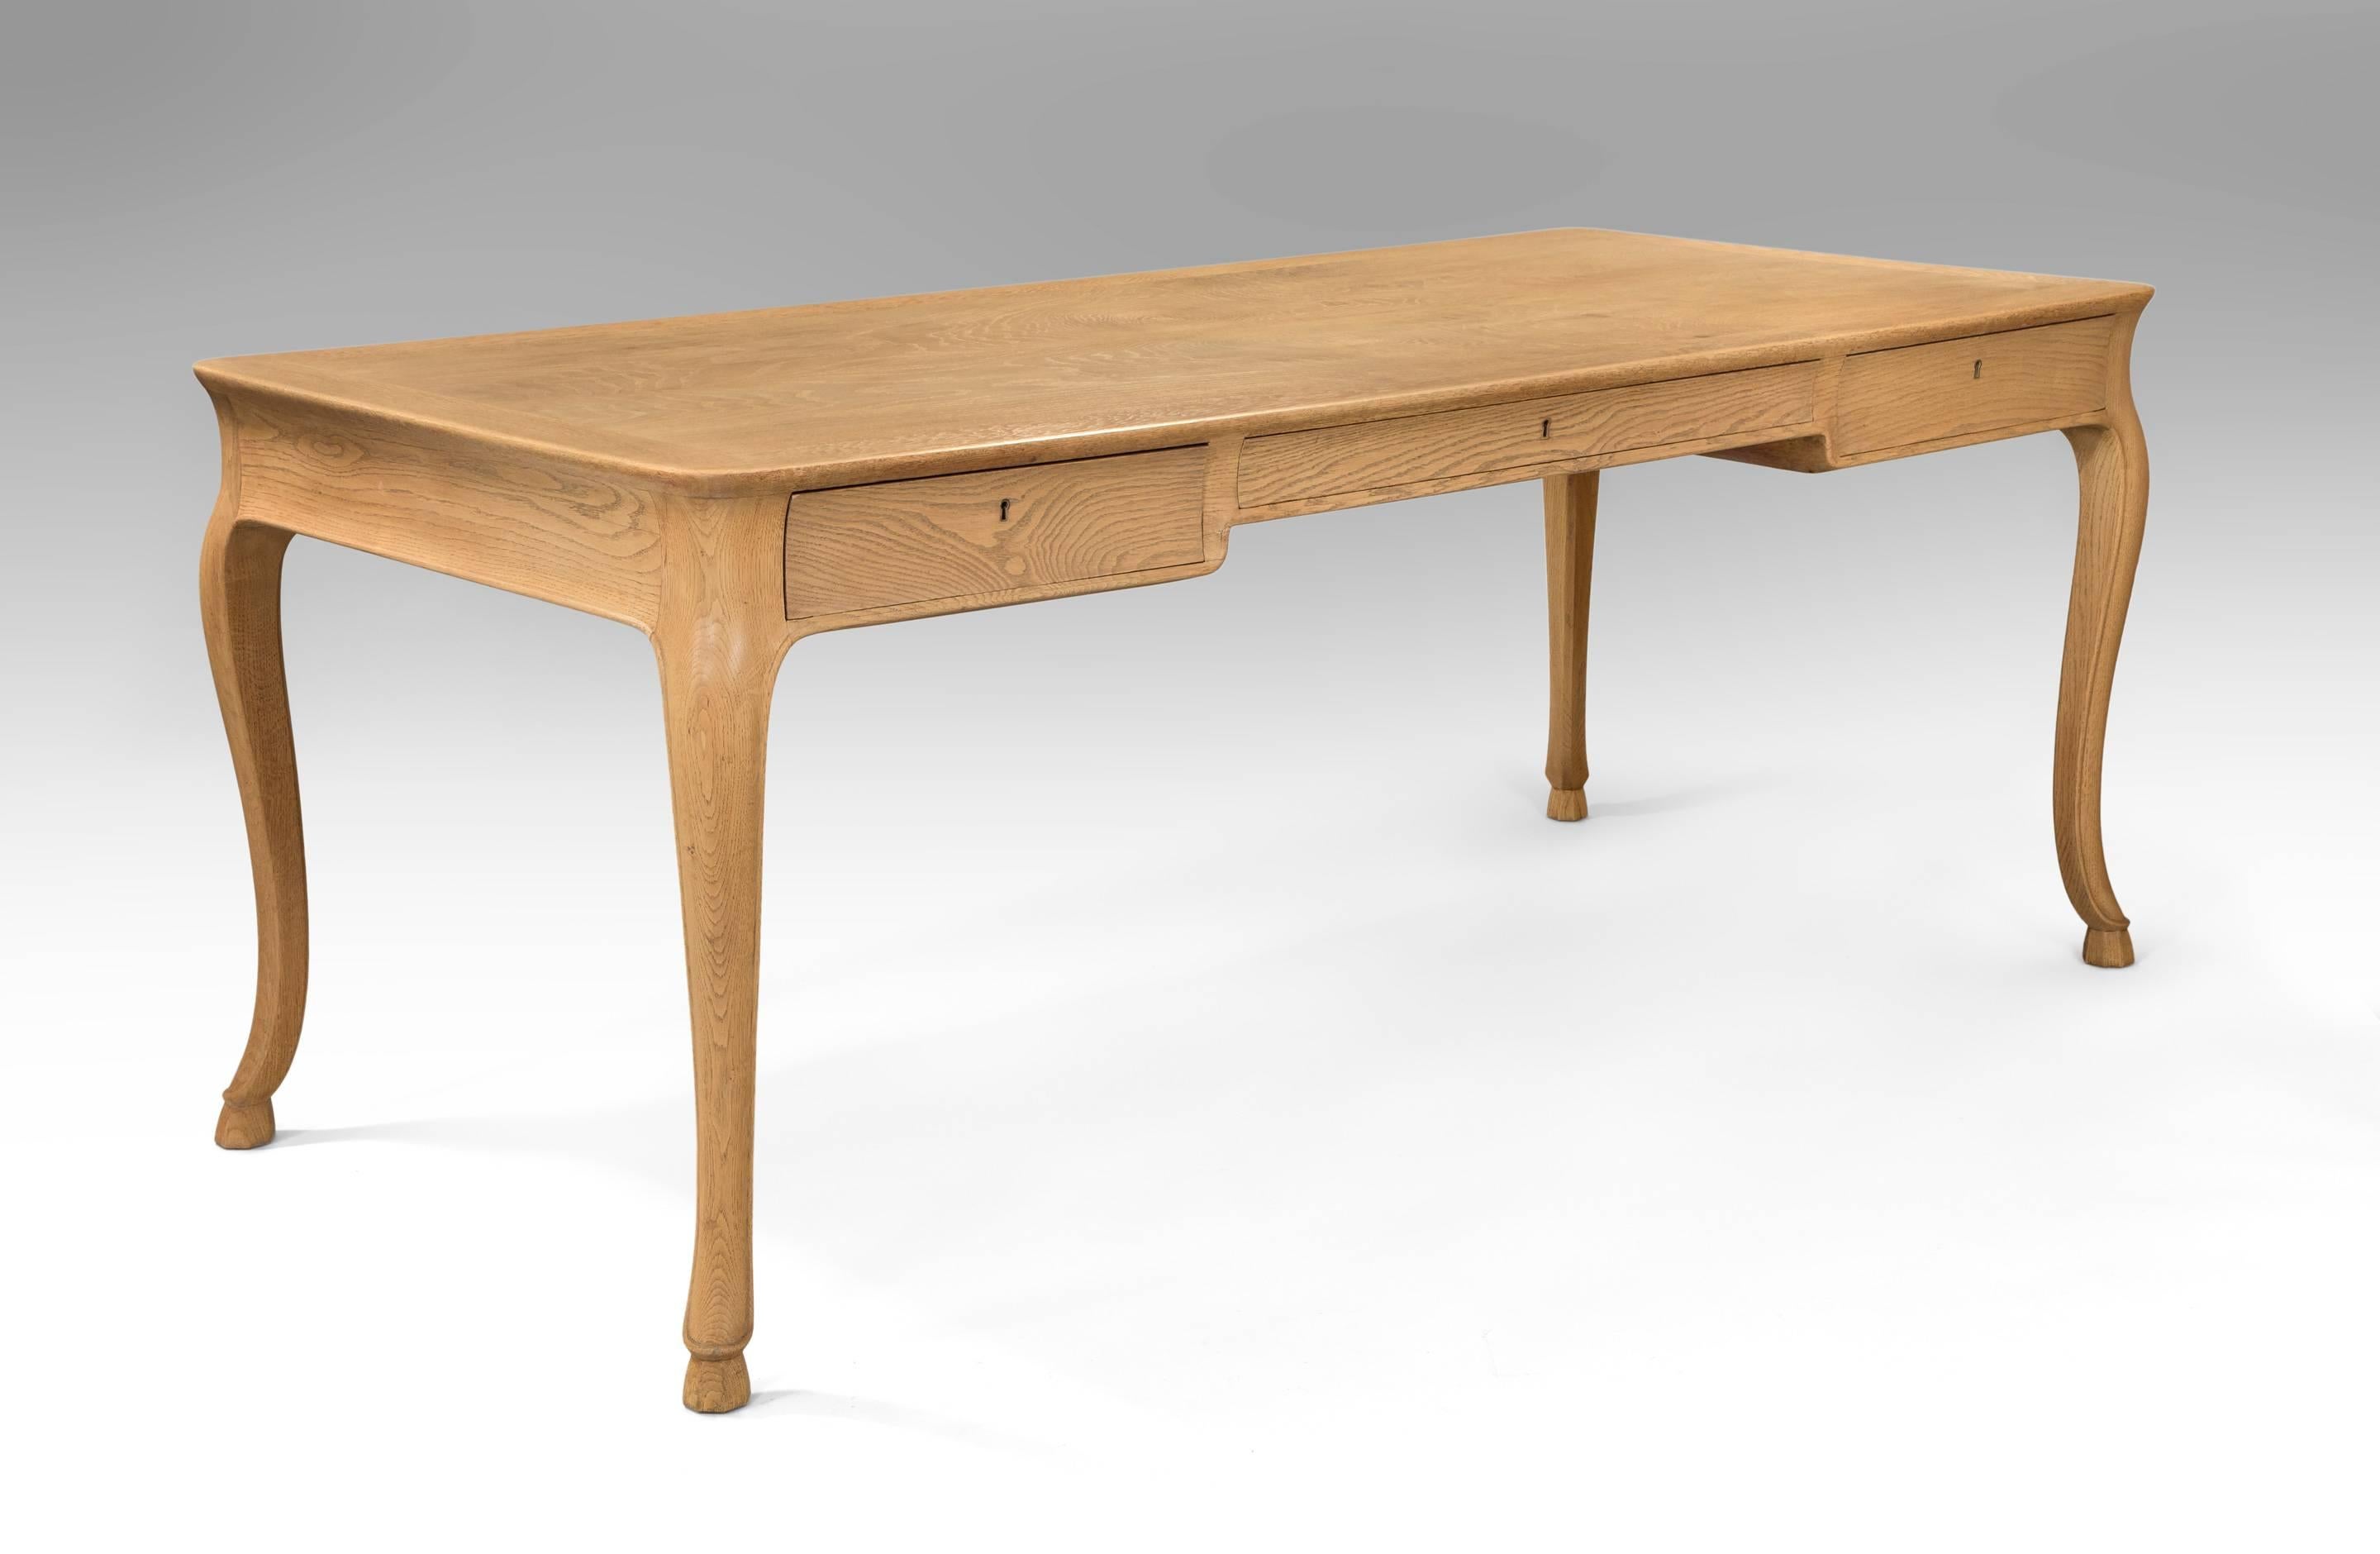 Frits Henningsen, Large Danish Elm and Oak Writing Table / Desk
A beautiful table in a very sophisticated and honest design by Henningsen one of the leading designers and craftsmen of his time. Would make a terrific center or library table. The